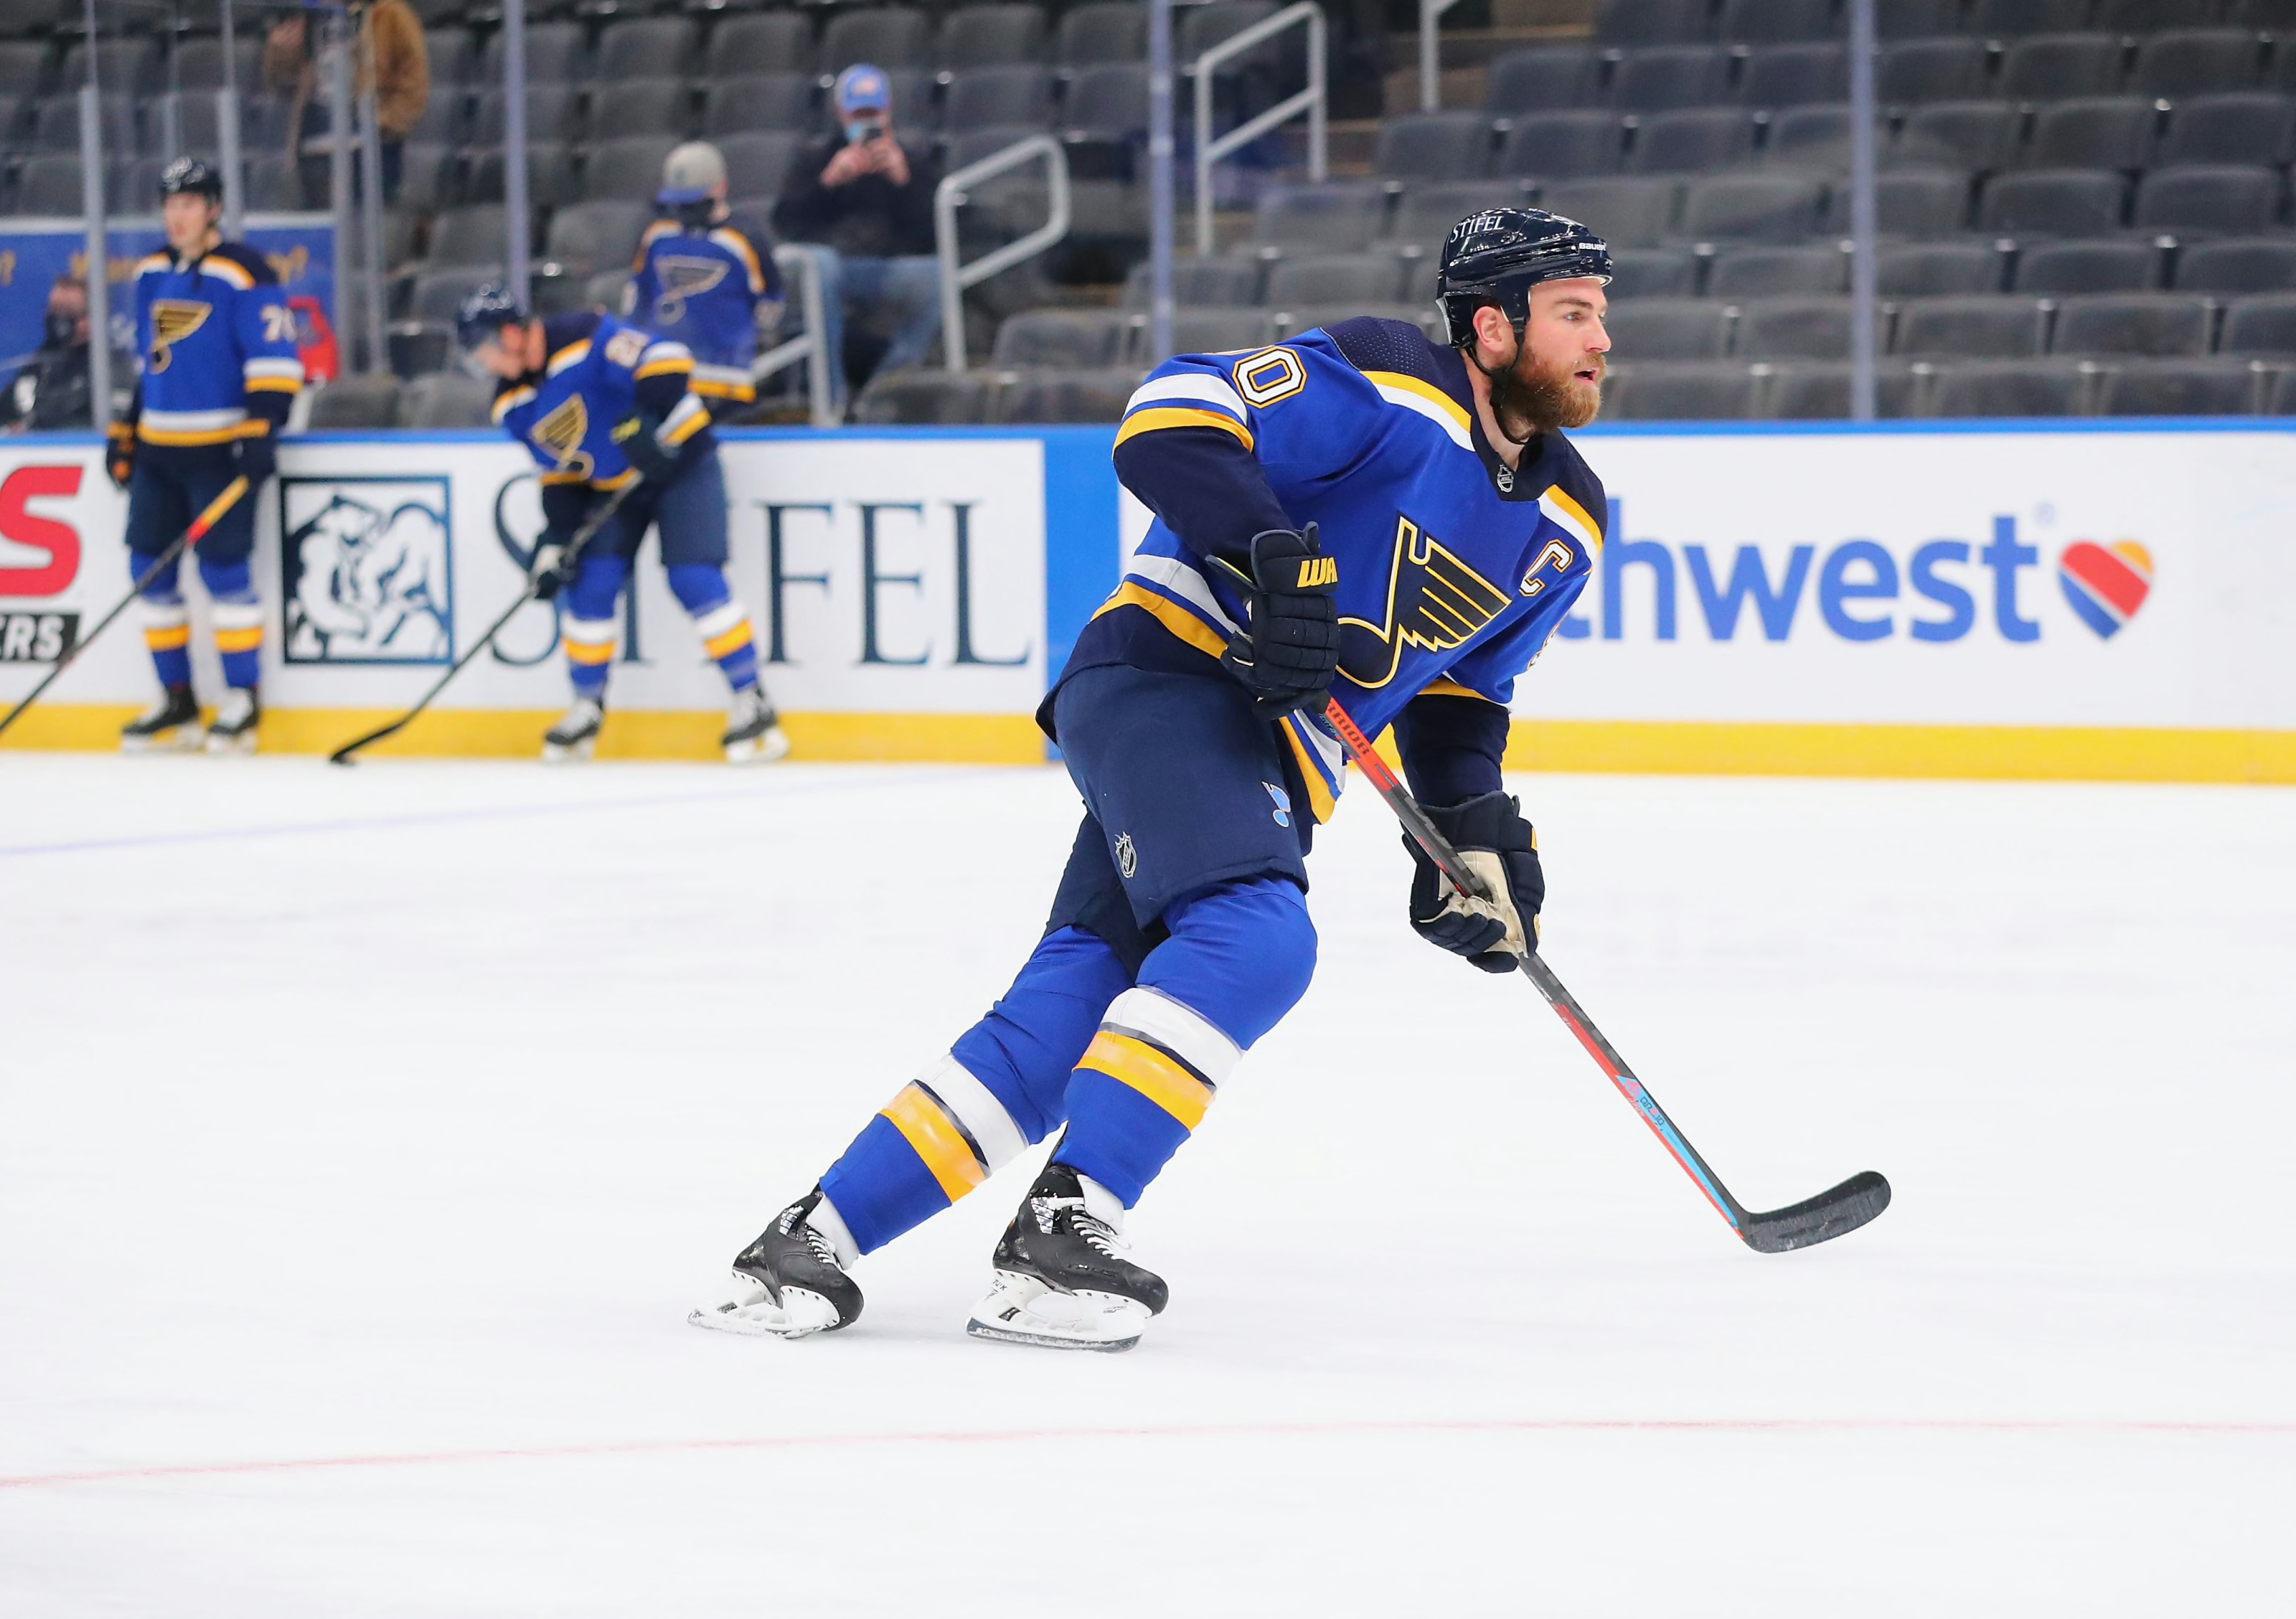 Chicago Blackhawks 3 St. Louis Blues free agents to consider